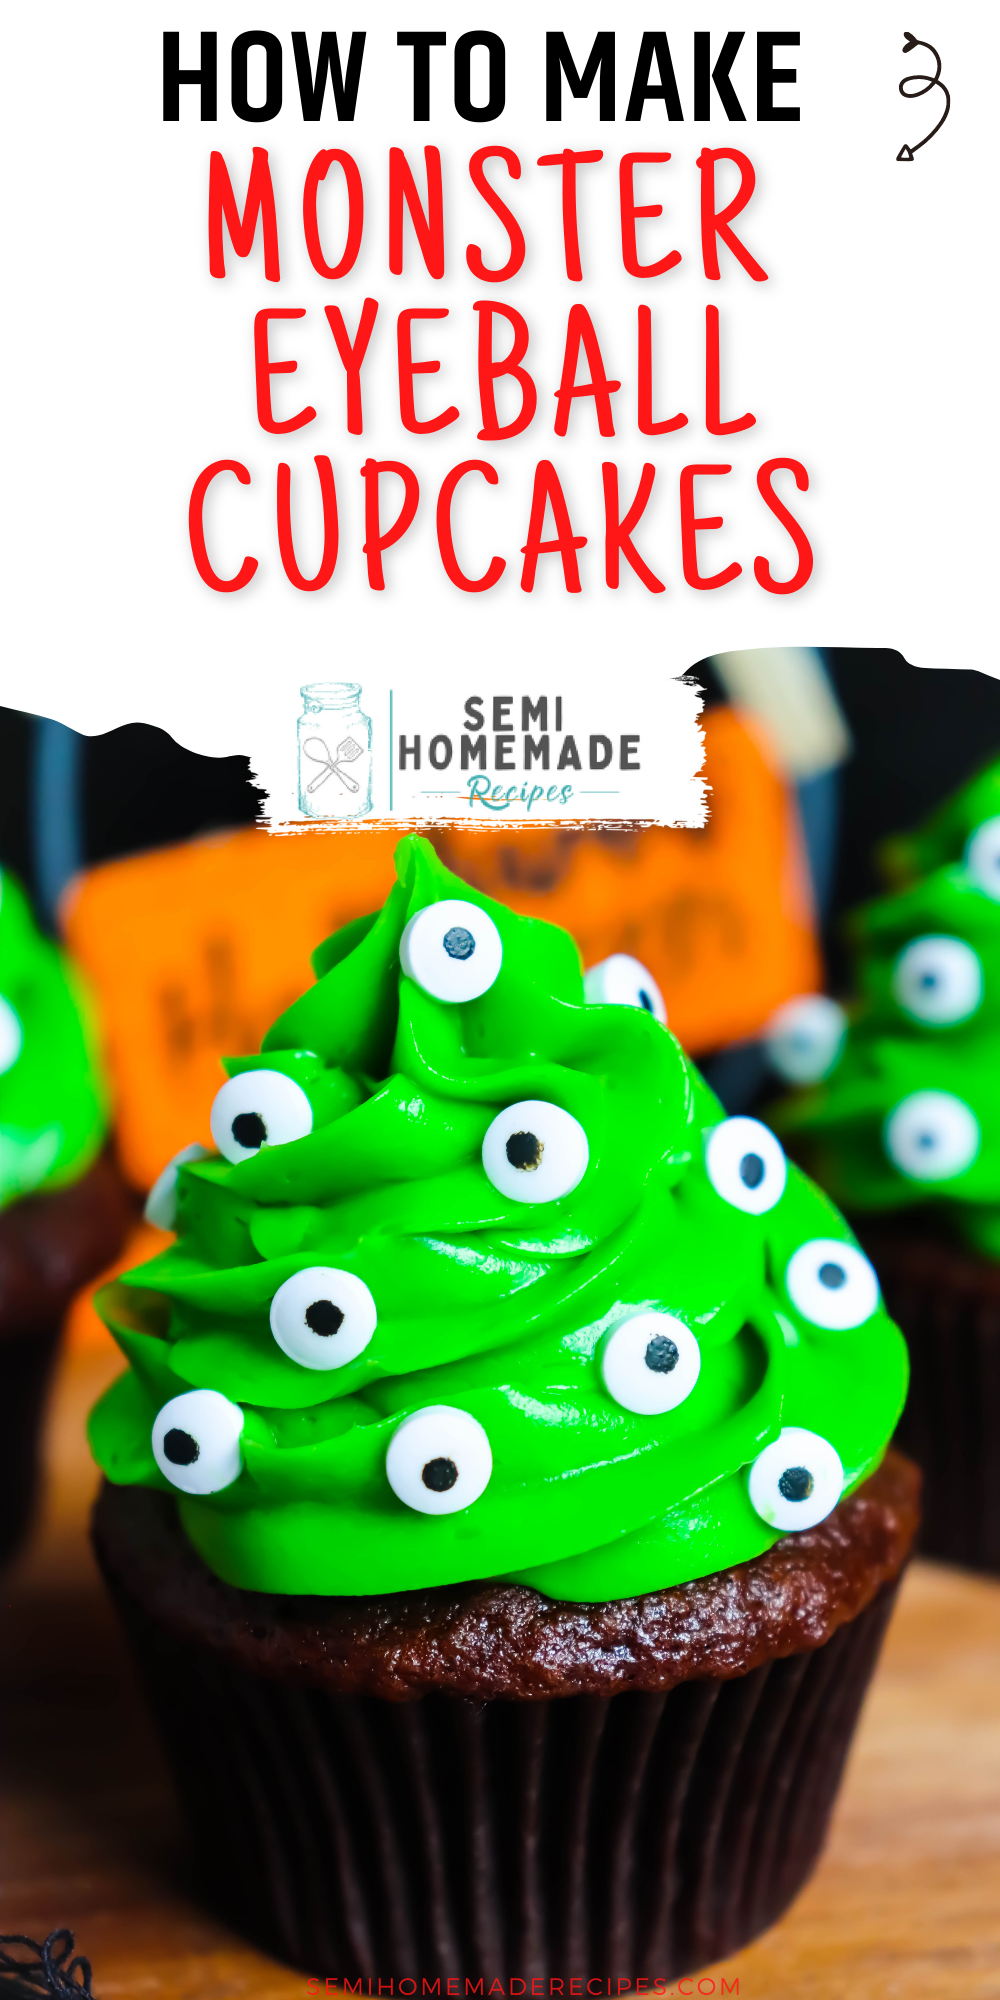 Monster Eyeball Cupcakes are made with a rich chocolate cupcakes and topped with sweet green frosting and candy eyeballs. Easy to make and simple for kids to help with!